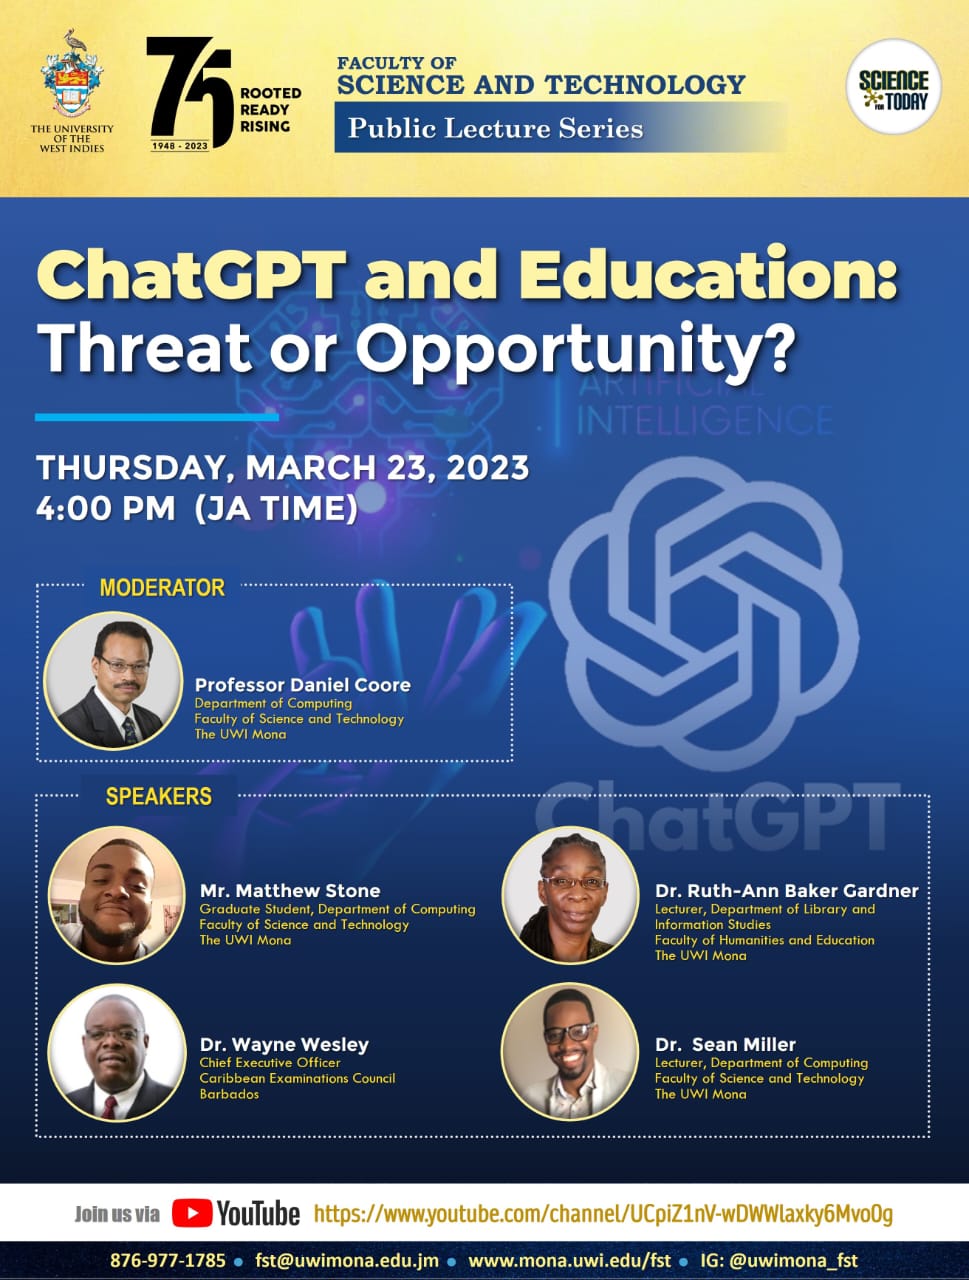 ChatGPT and Education: Threat or Opportunity?